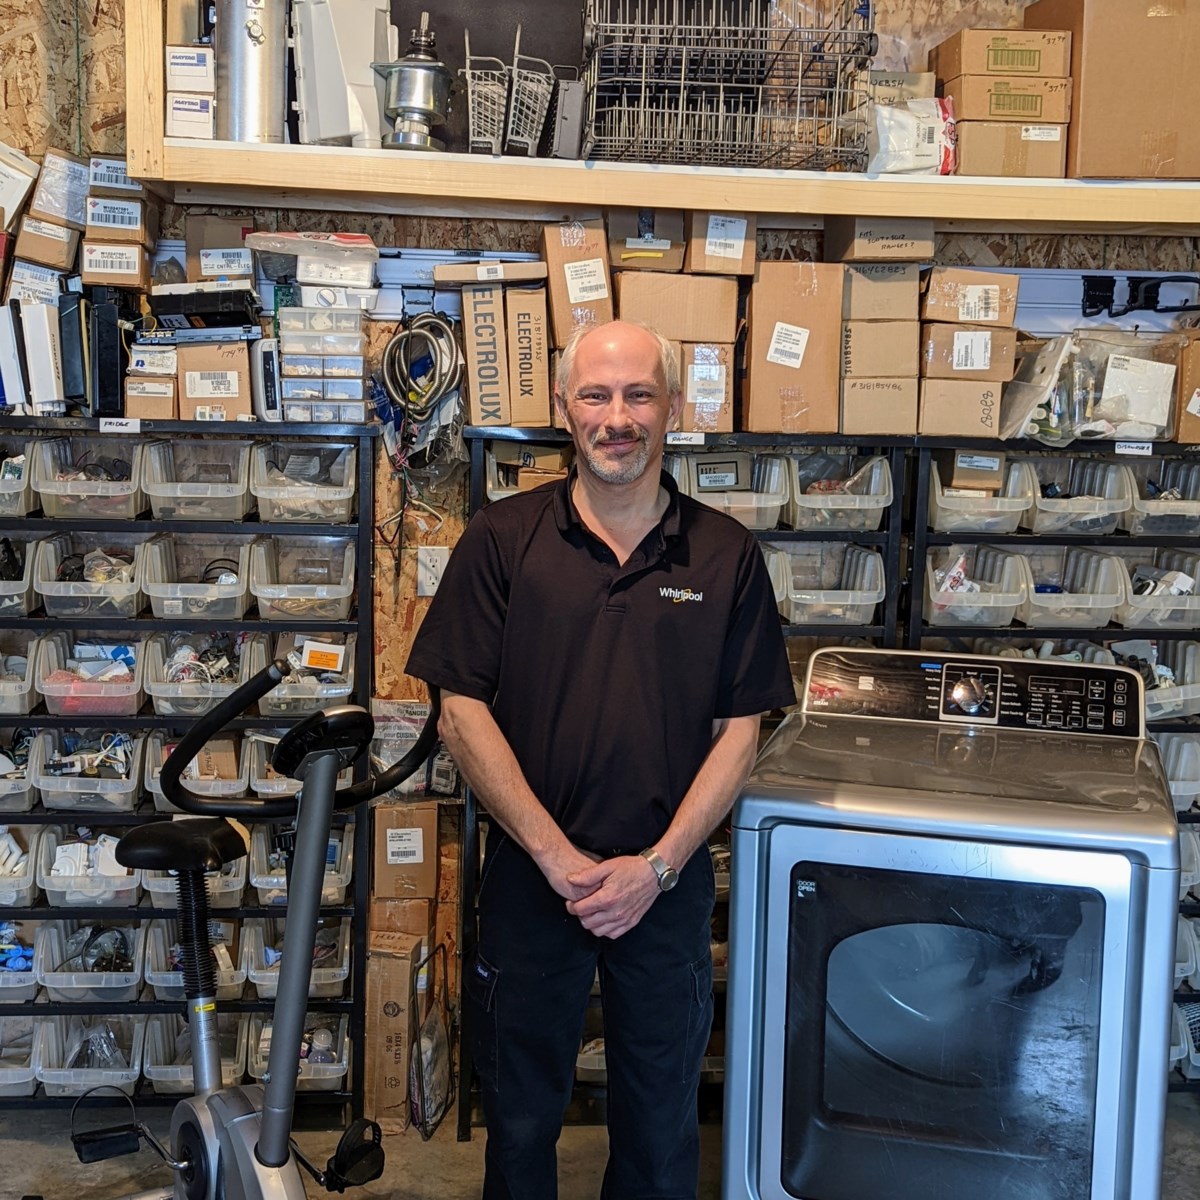 ‘If it’s broken, I’ll fix it’: repairman works on appliances, fitness equipment, vacuums, and more